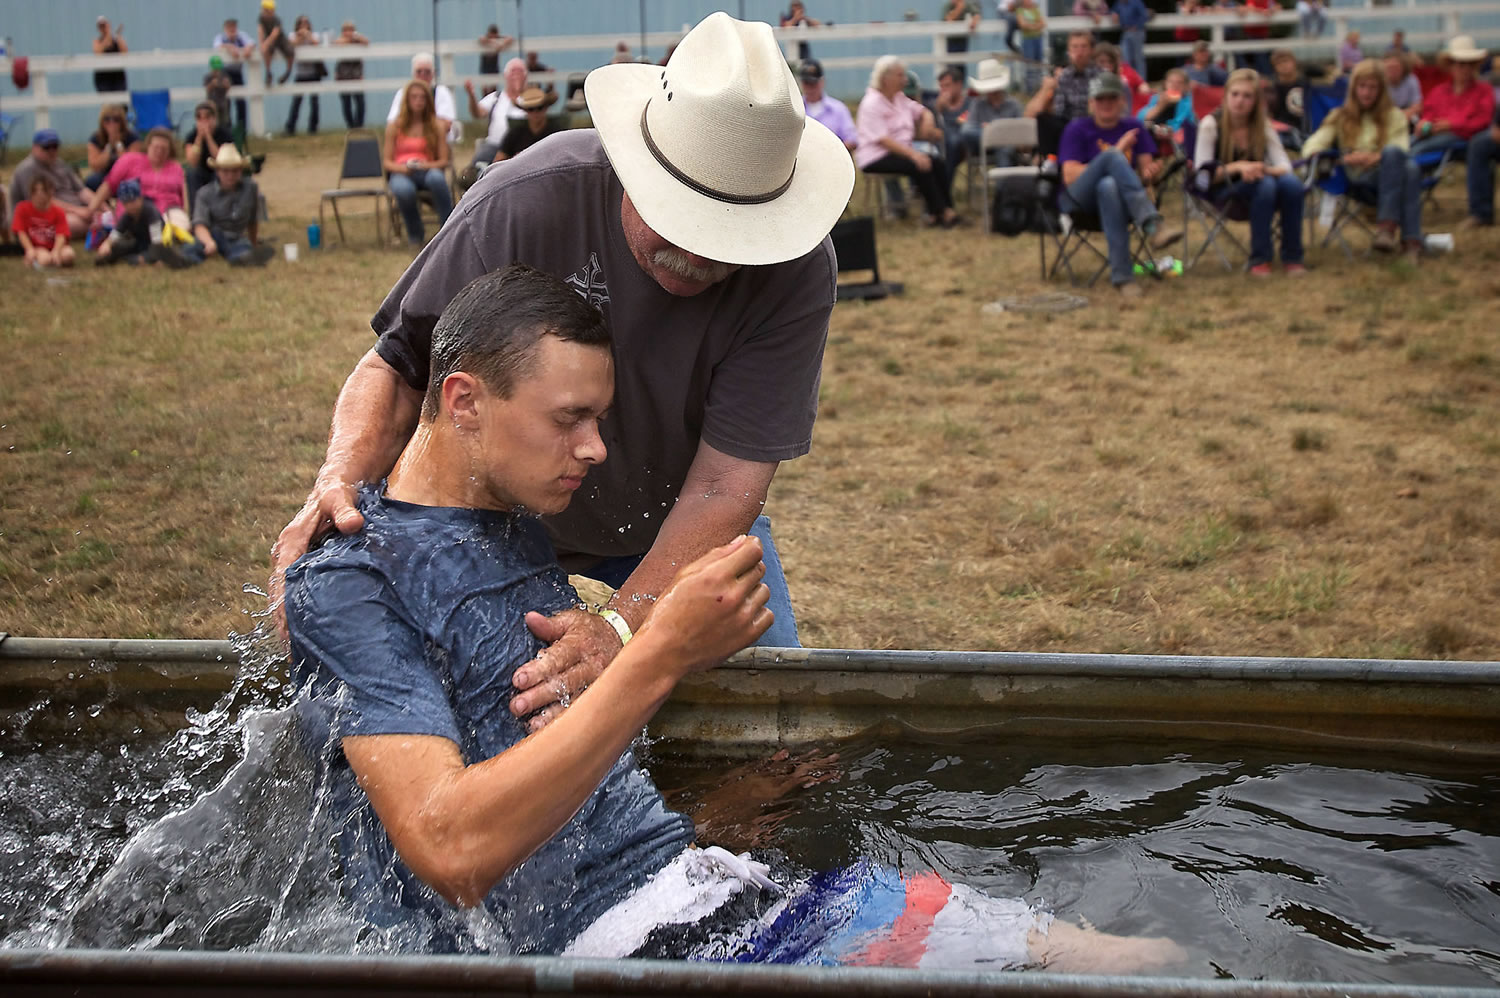 Using a horse trough, Larry Cutler baptizes Daniel Sage at the conclusion of the camp at the Vancouver Saddle Club on Aug. 15.